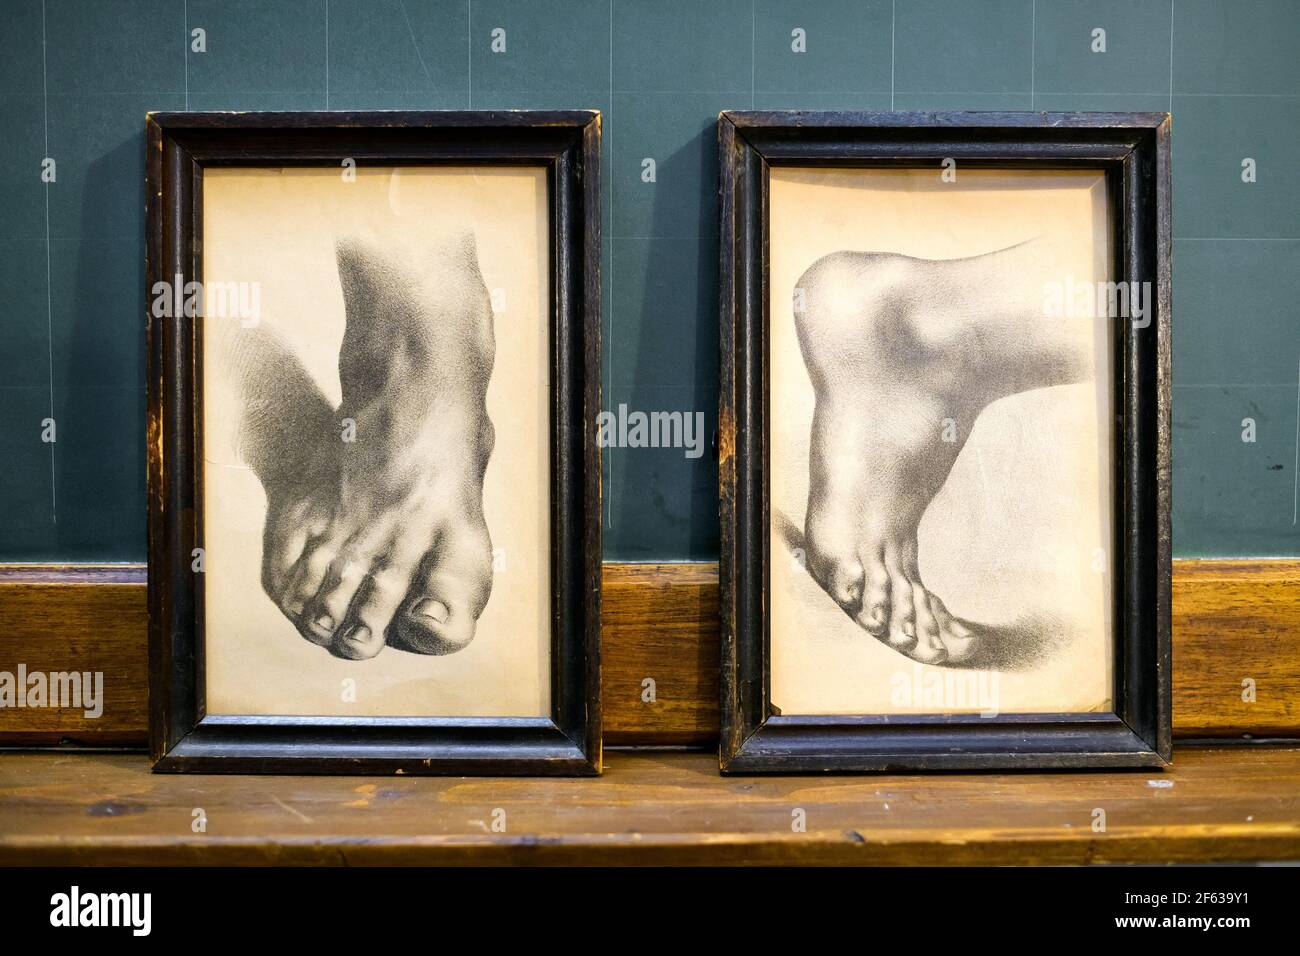 Set of two vintage drawings of human feet in different orientations in simple worn black wooden frames displayed on a shelf Stock Photo